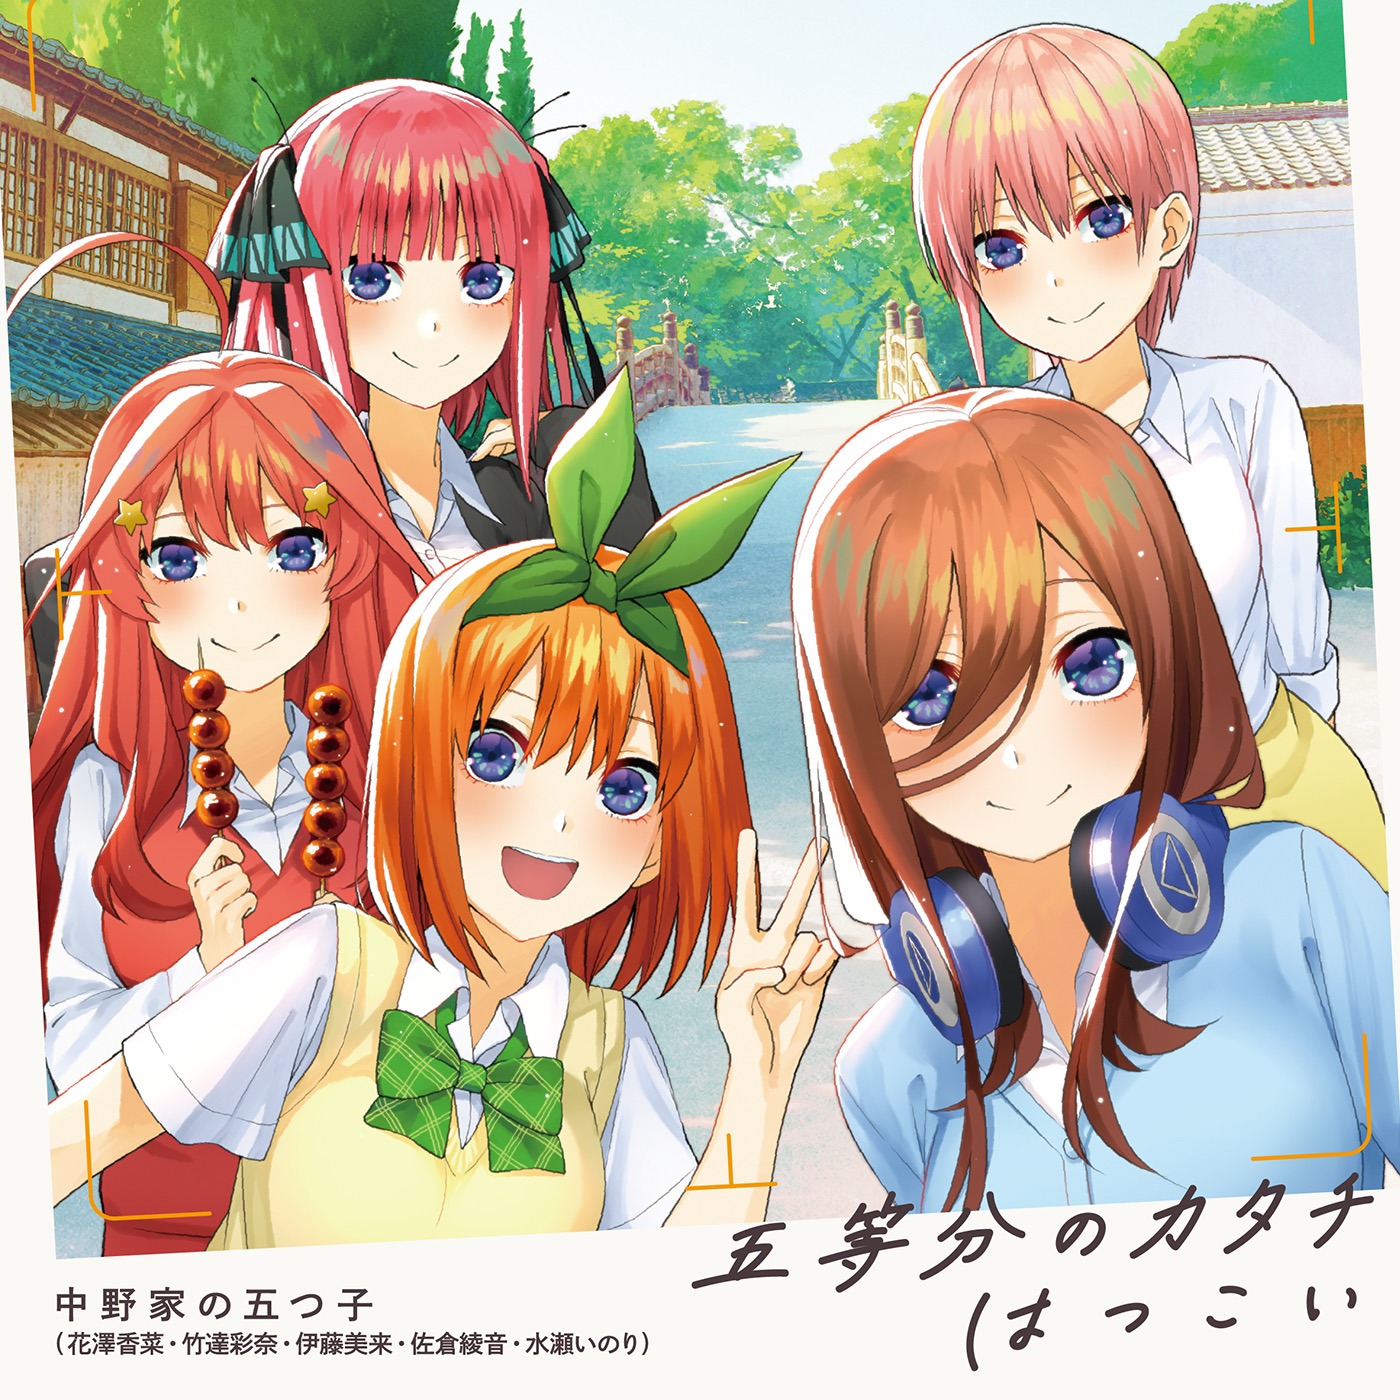 Music Video for The Quintessential Quintuplets Movie Theme Song